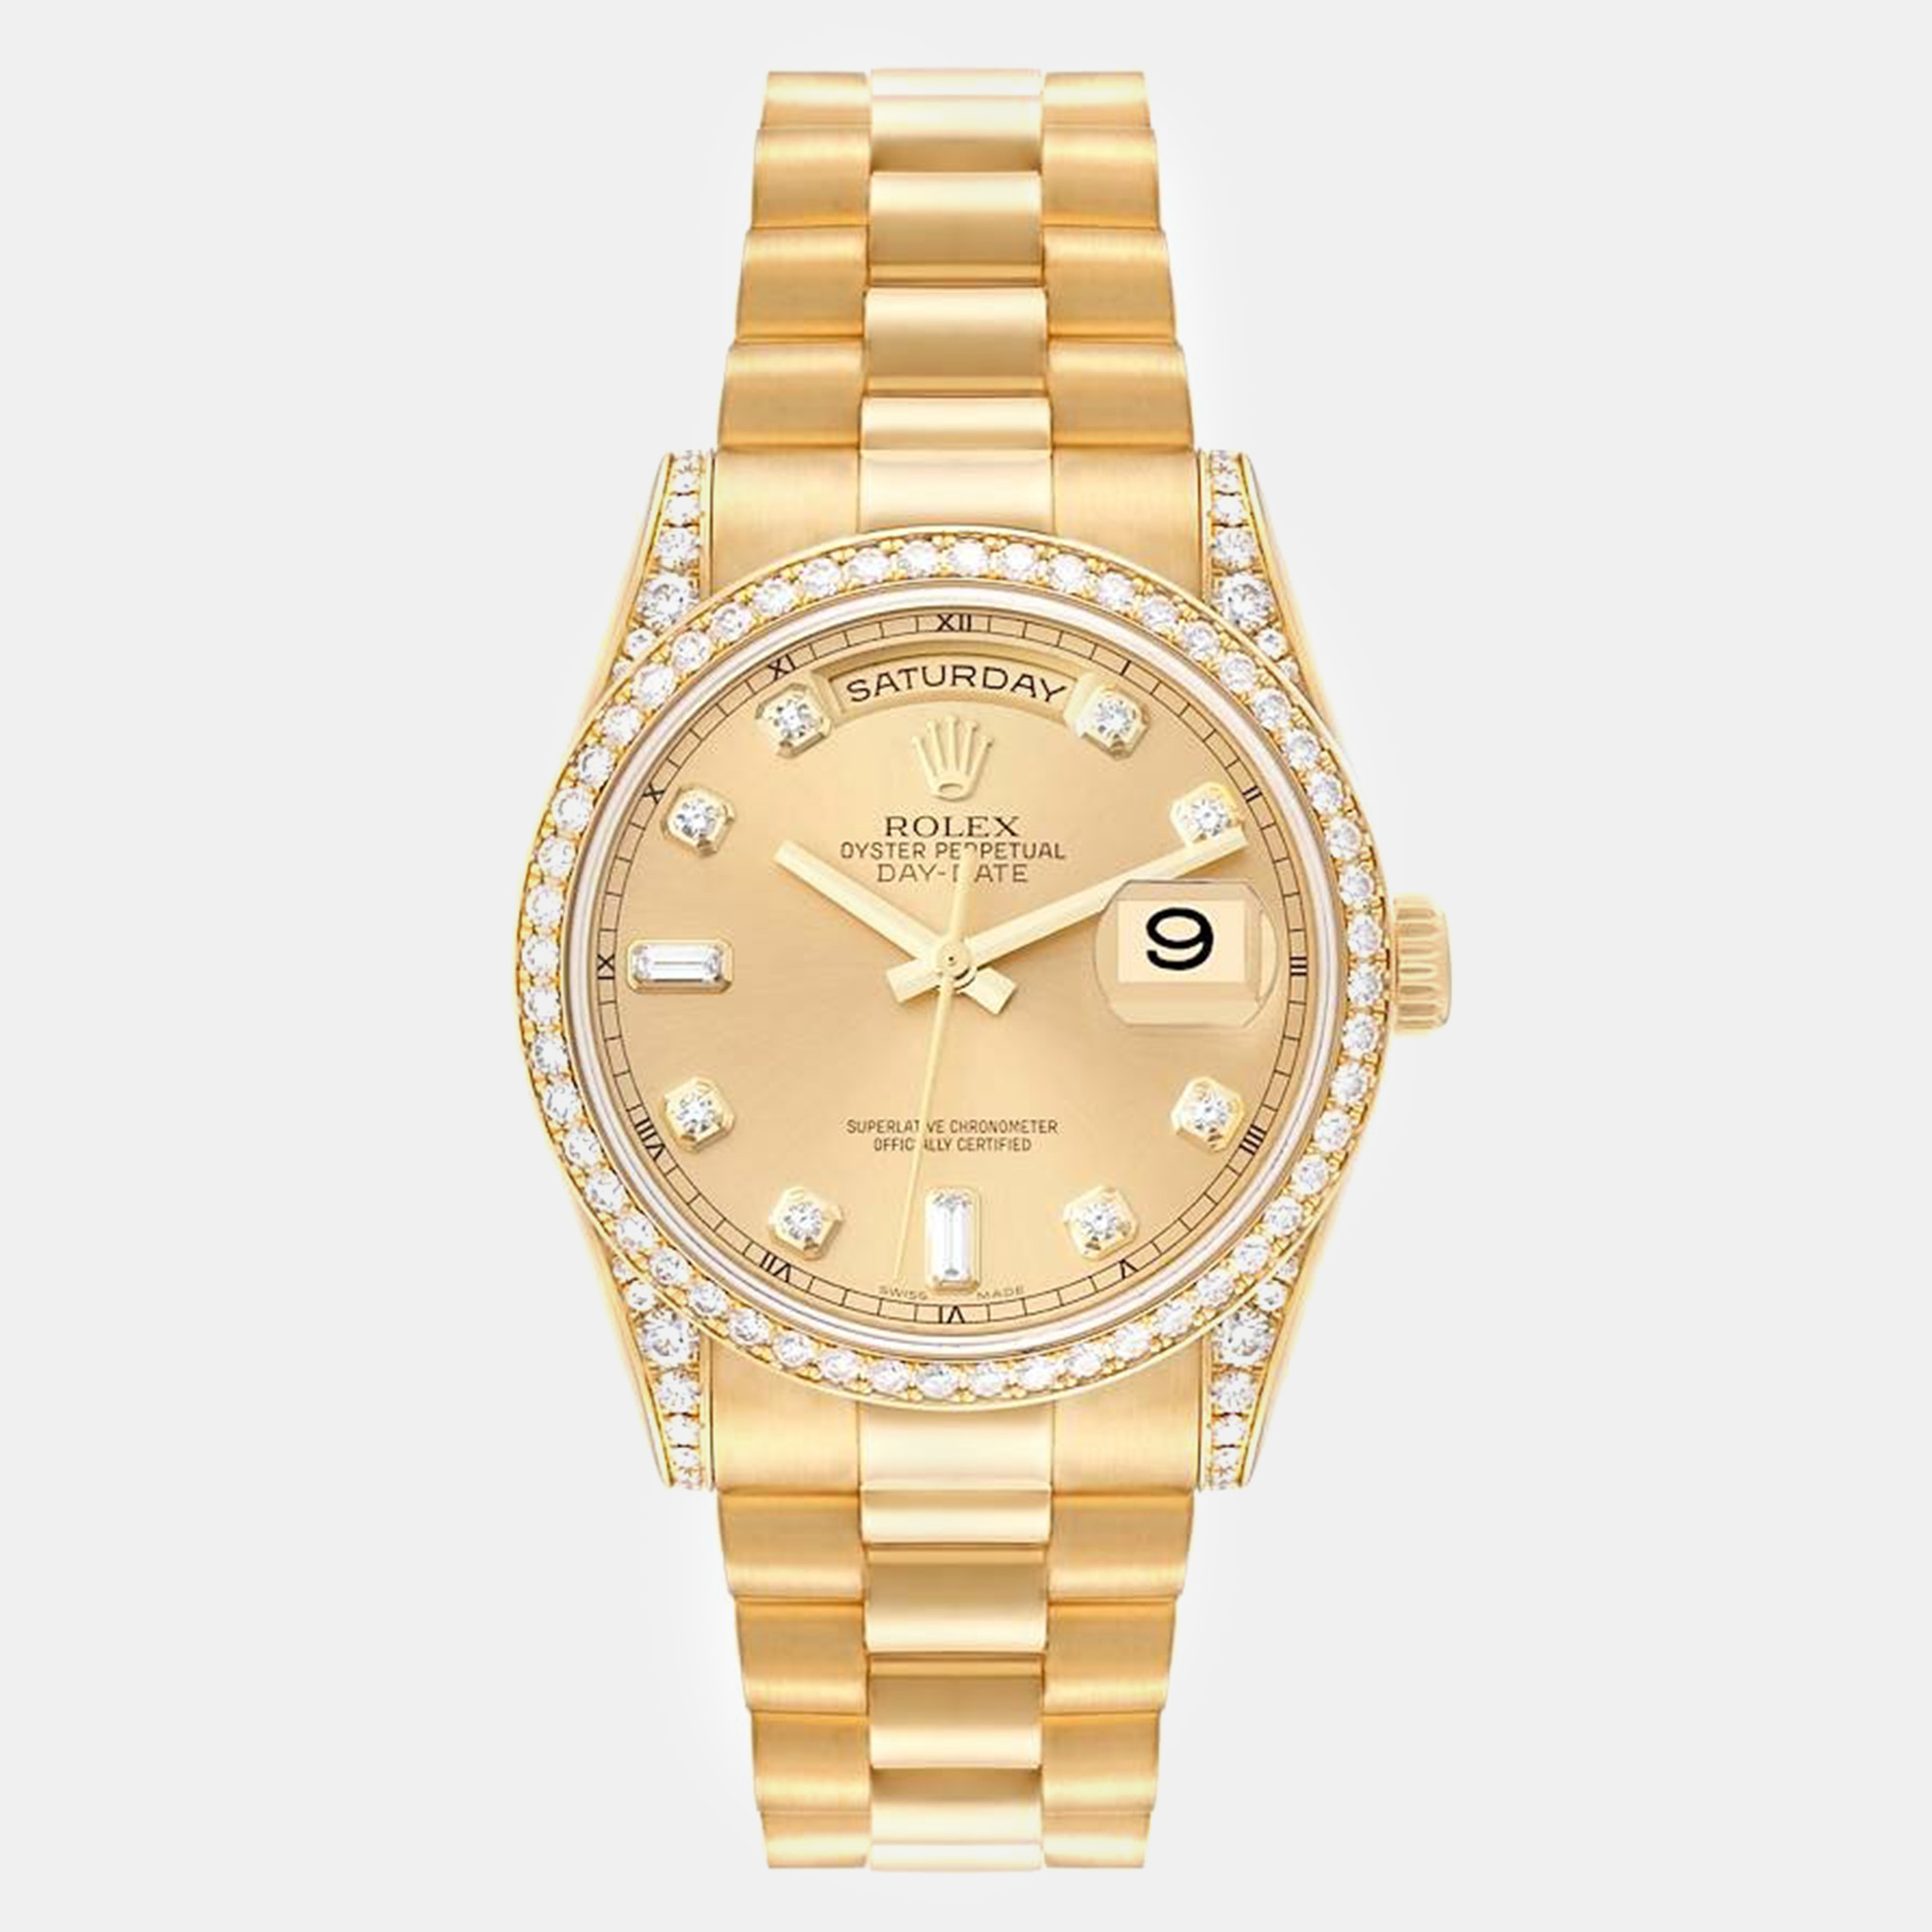 Elevate your watch collection with an authentic Rolex masterpiece. A symbol of status and precision it boasts exquisite craftsmanship a timeless design and a legacy of horological excellence.